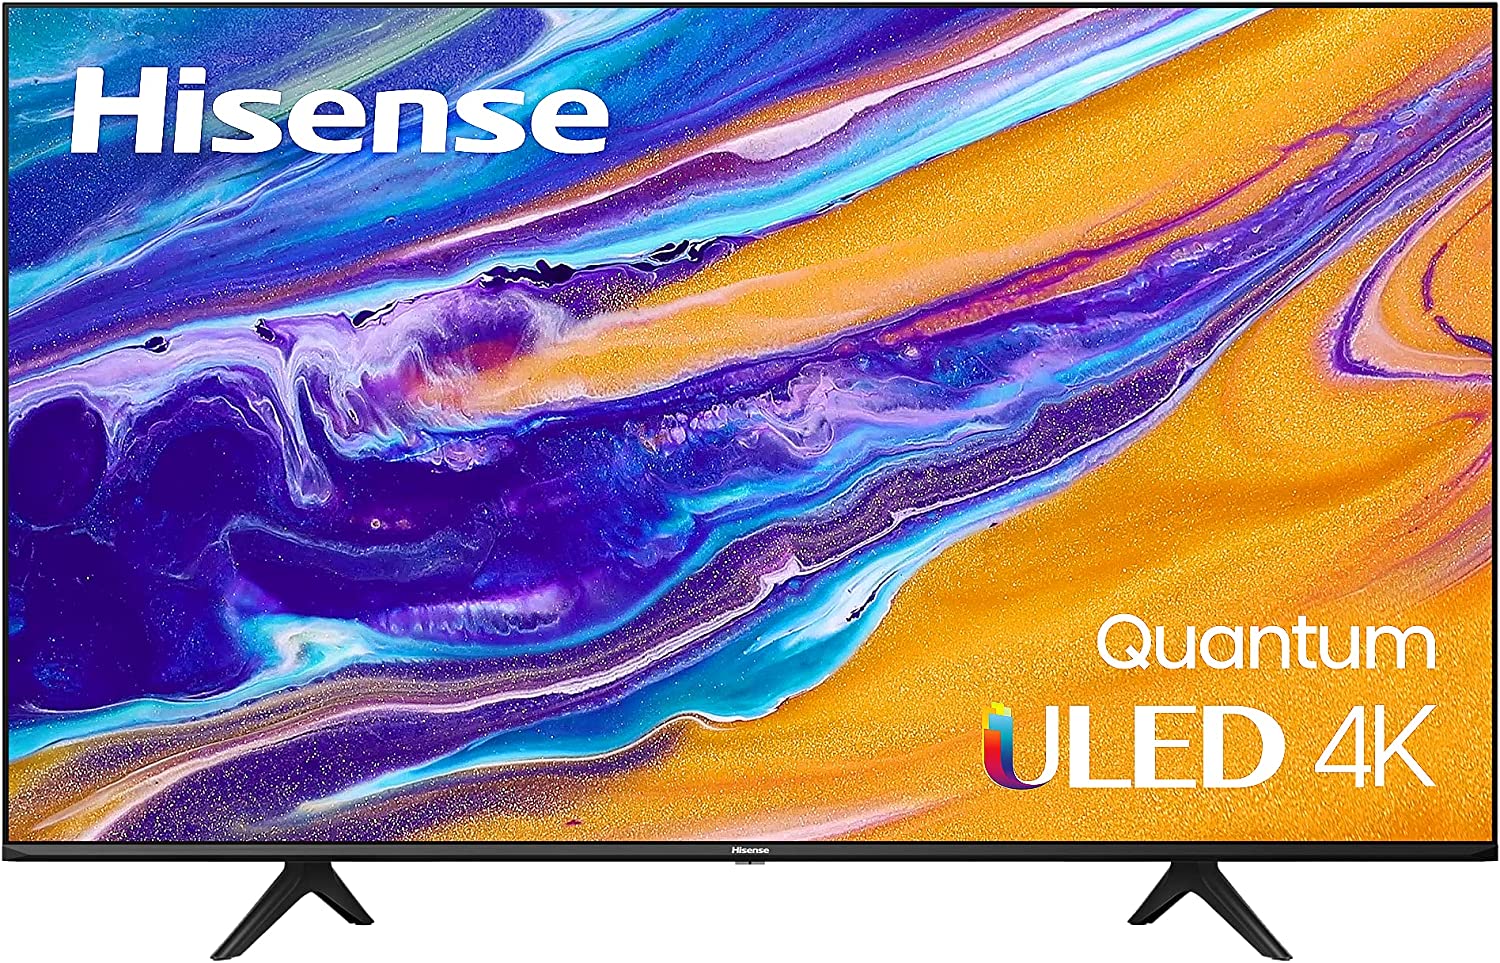 The finest 4K TVs for crisp, bright visuals and consistent streaming